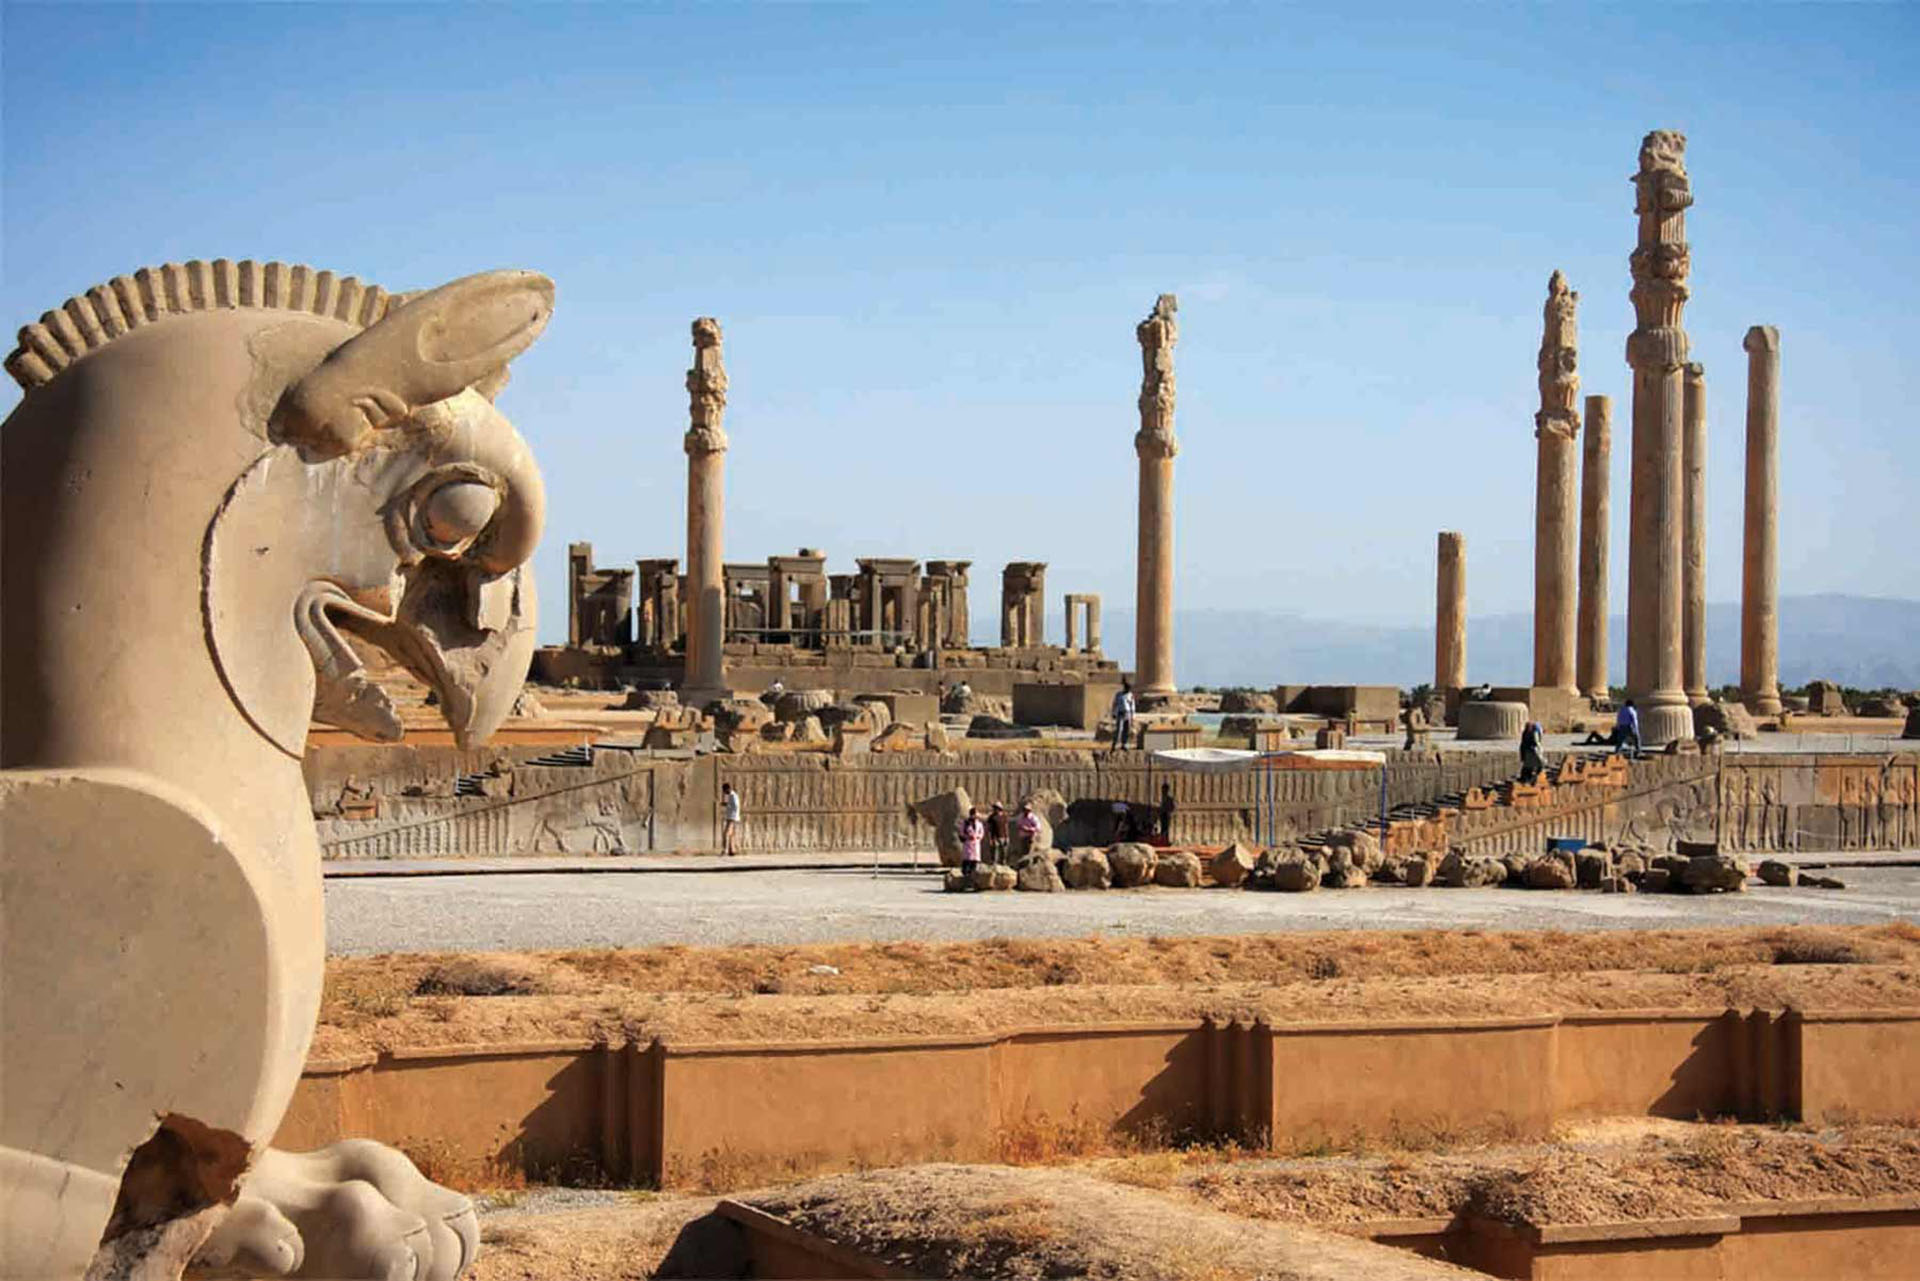 Persepolis: The Magnificent Ancient Capital of the Persian Achaemenid Empire